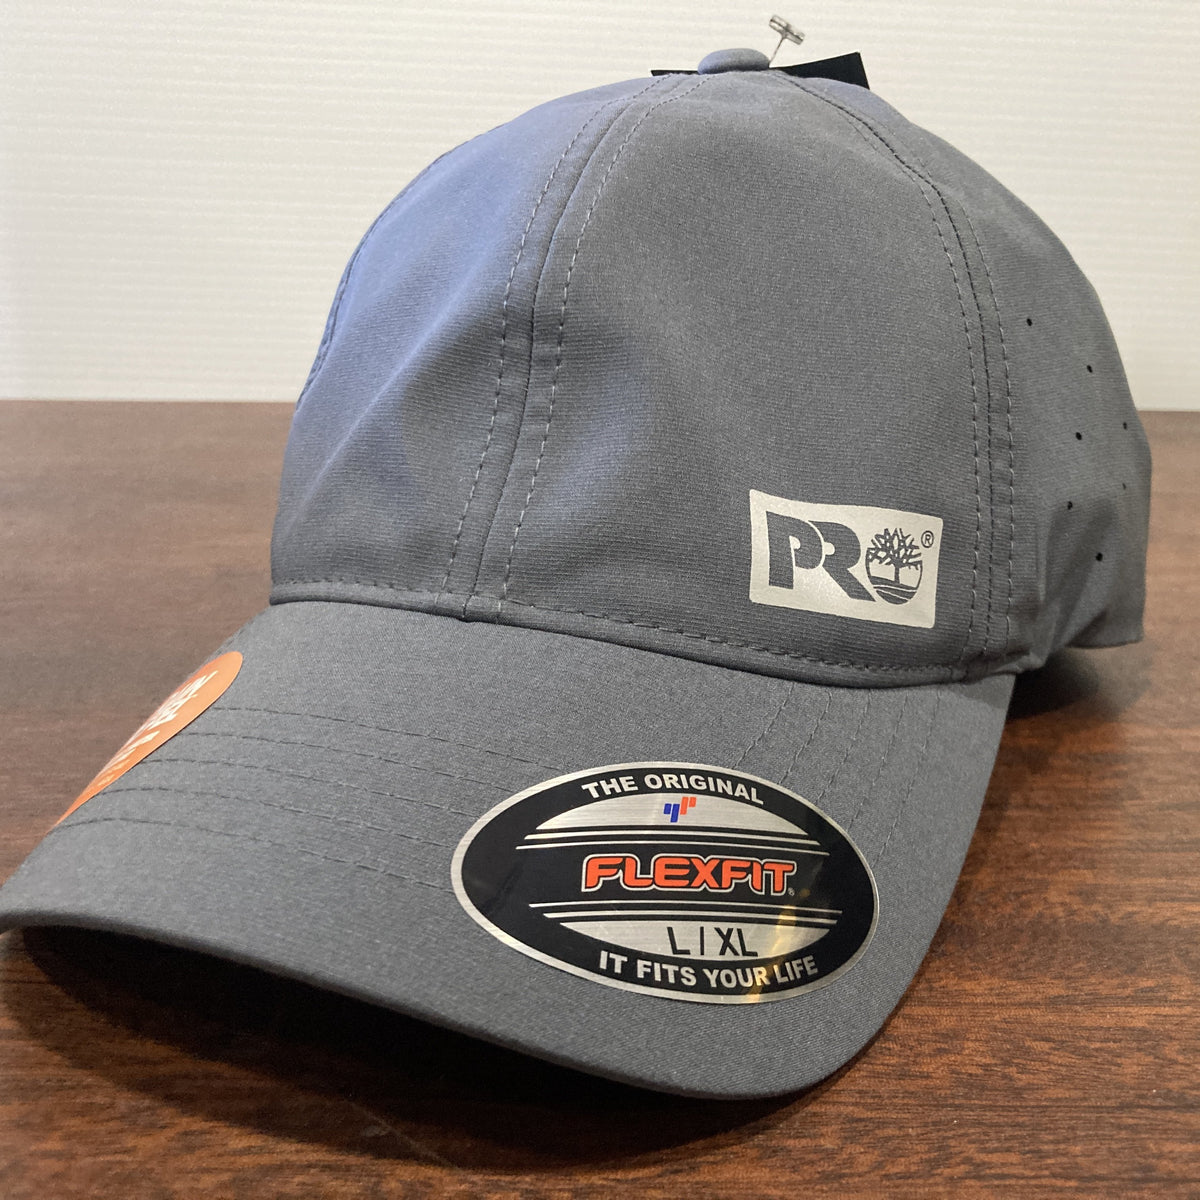 Timberland Pro Performance Hat – Outfitters Rose North Wind Ltd